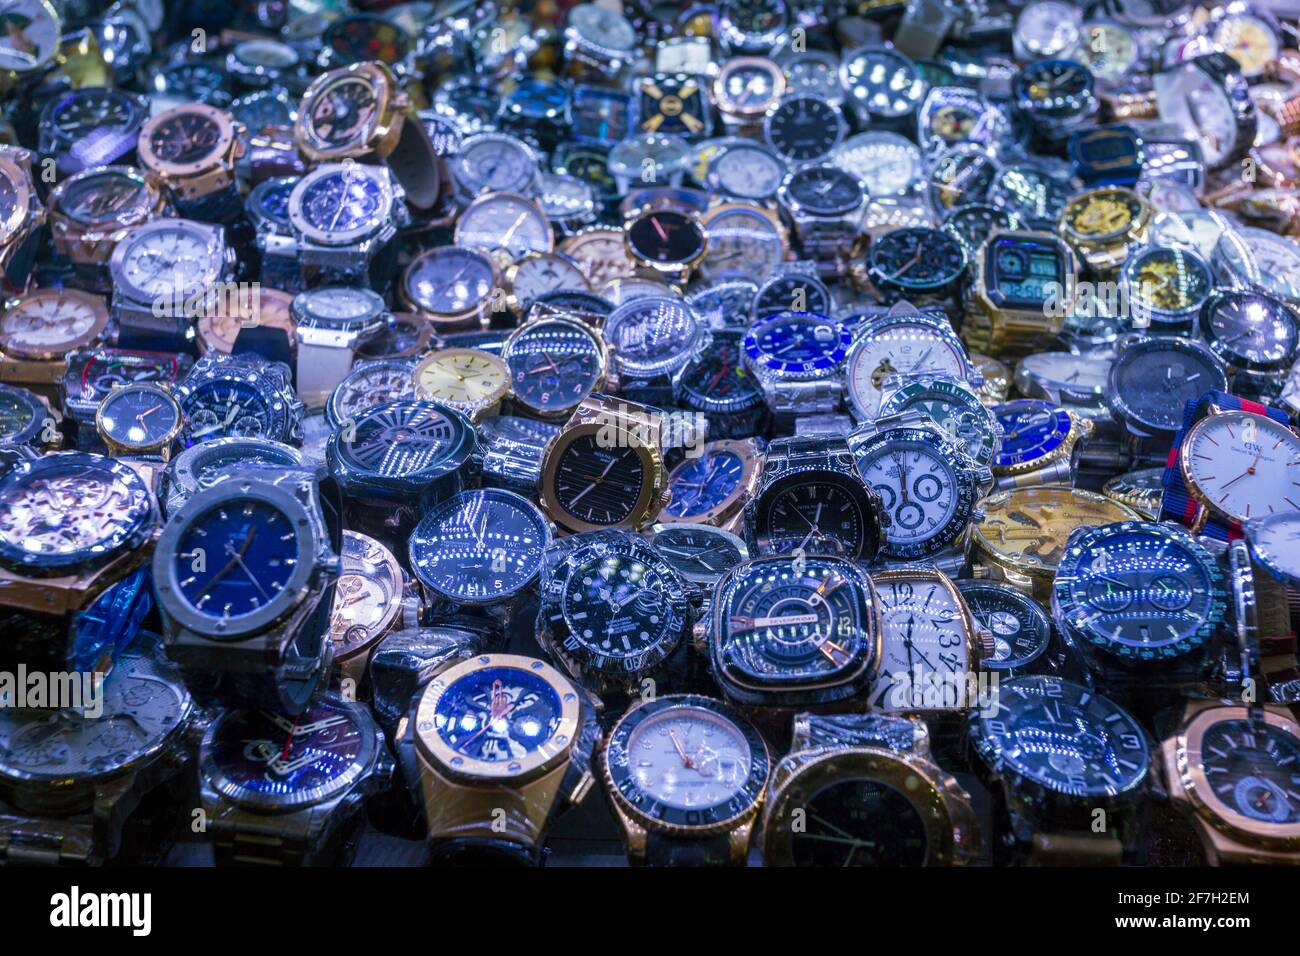 Random Pile of Old Mechanical Watch Parts Stock Image - Image of